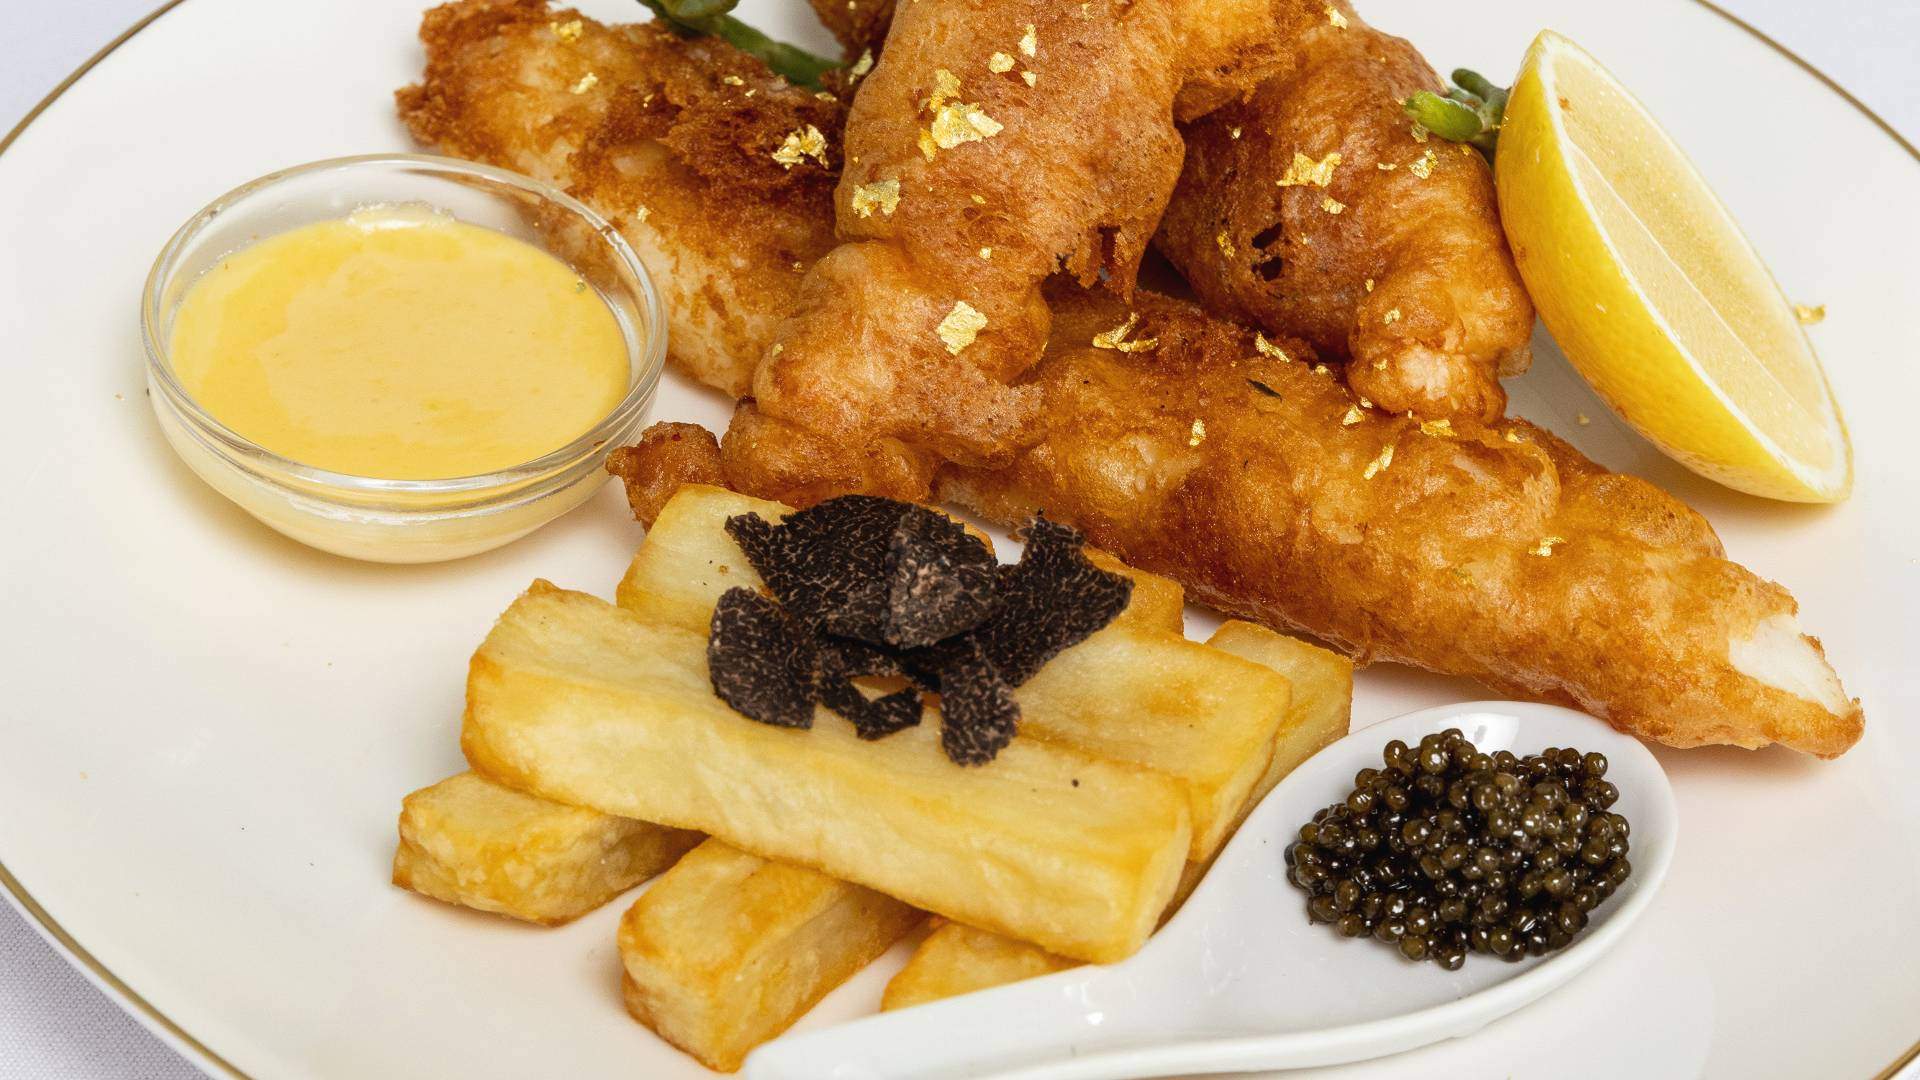 $500 Fish and Chips